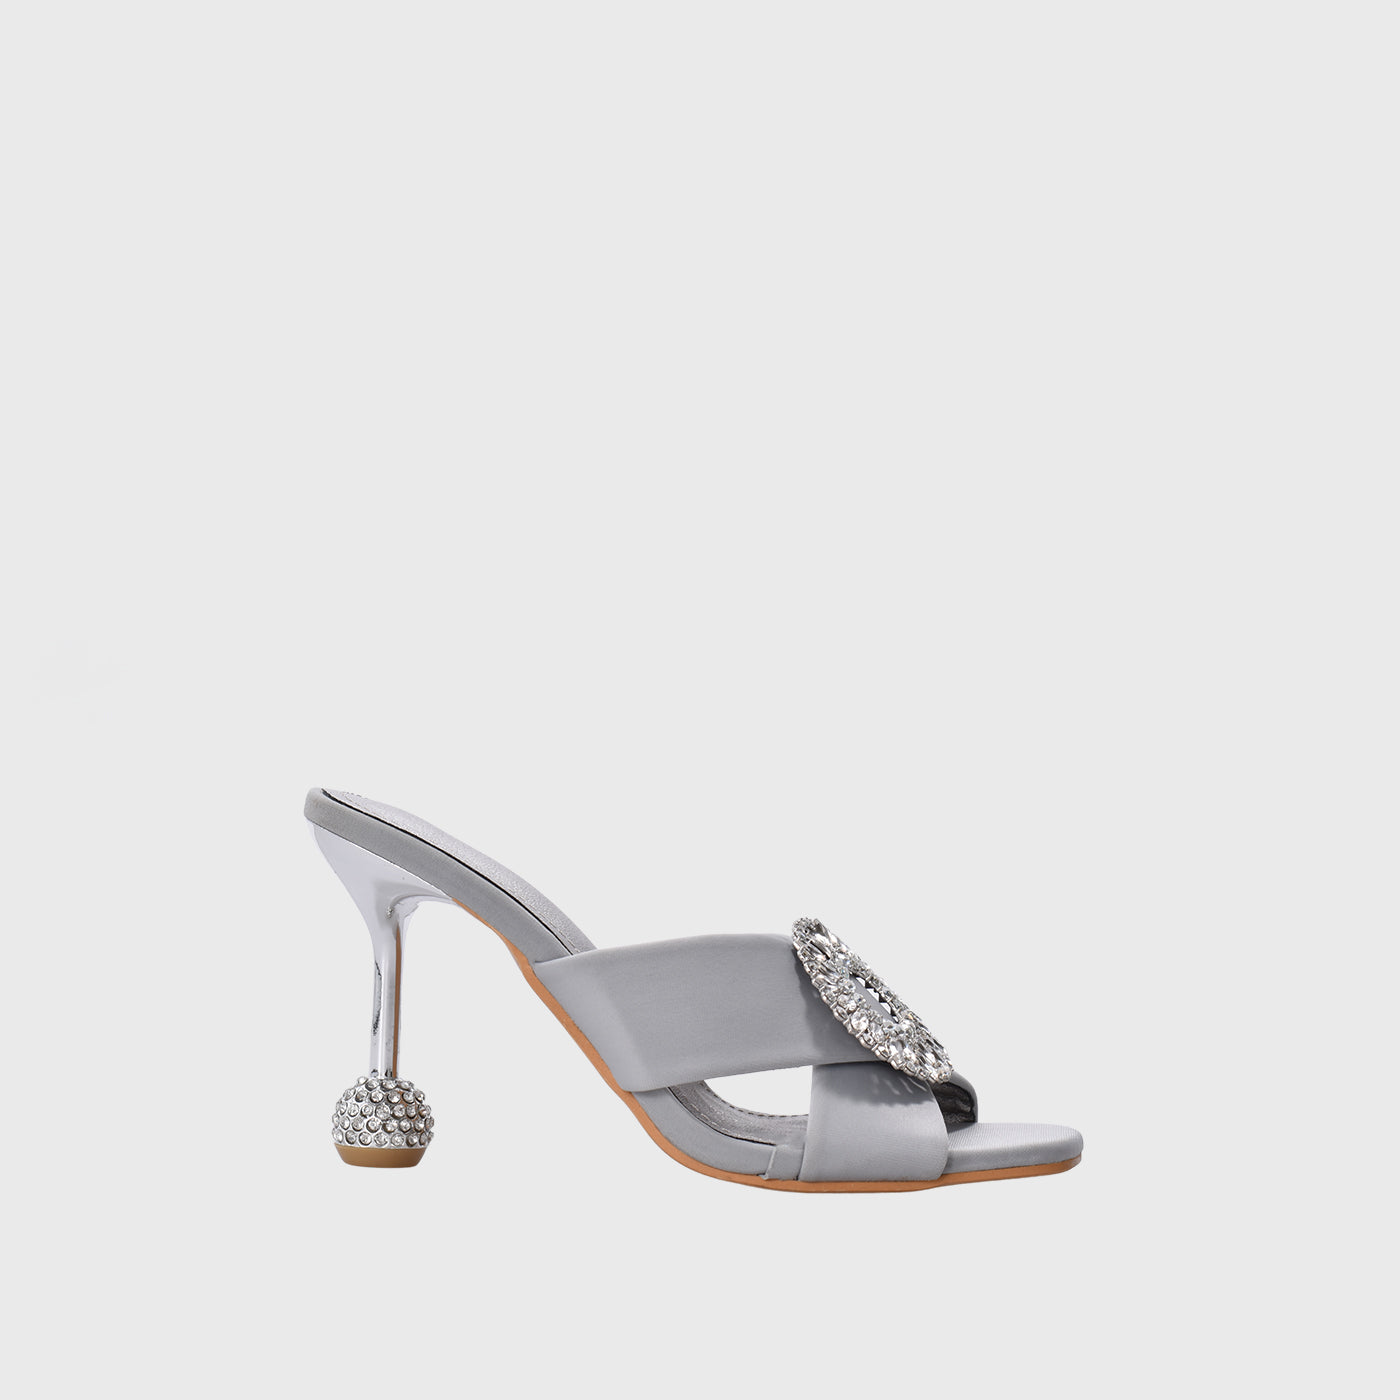 Silver Leather Heel Slipper with Studs